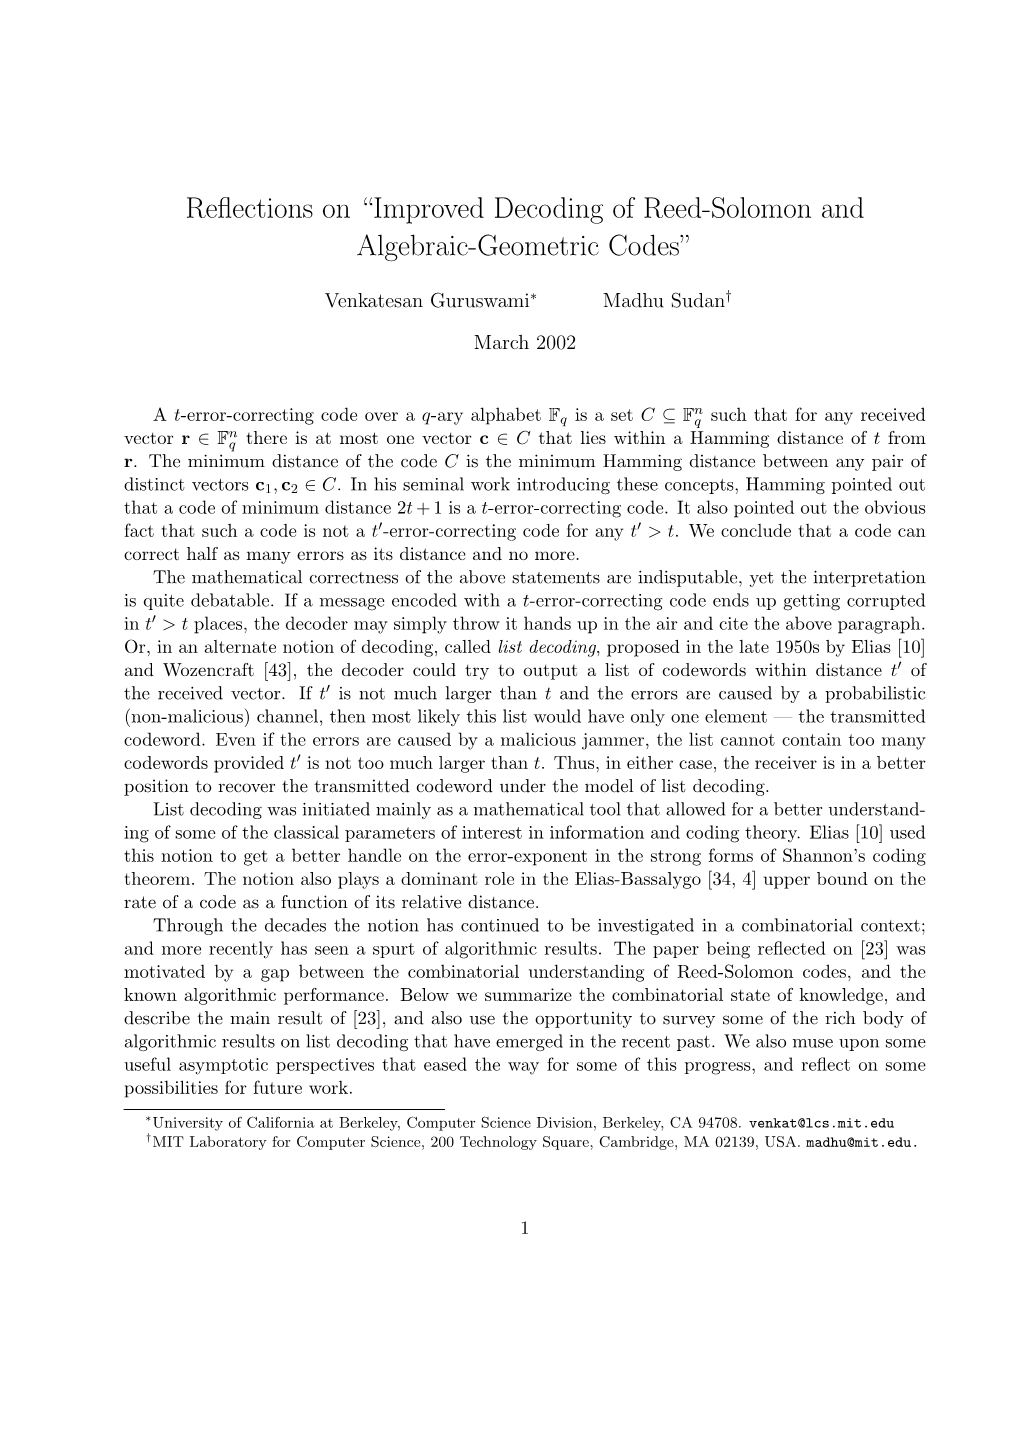 Reflections on ``Improved Decoding of Reed-Solomon and Algebraic-Geometric Codes